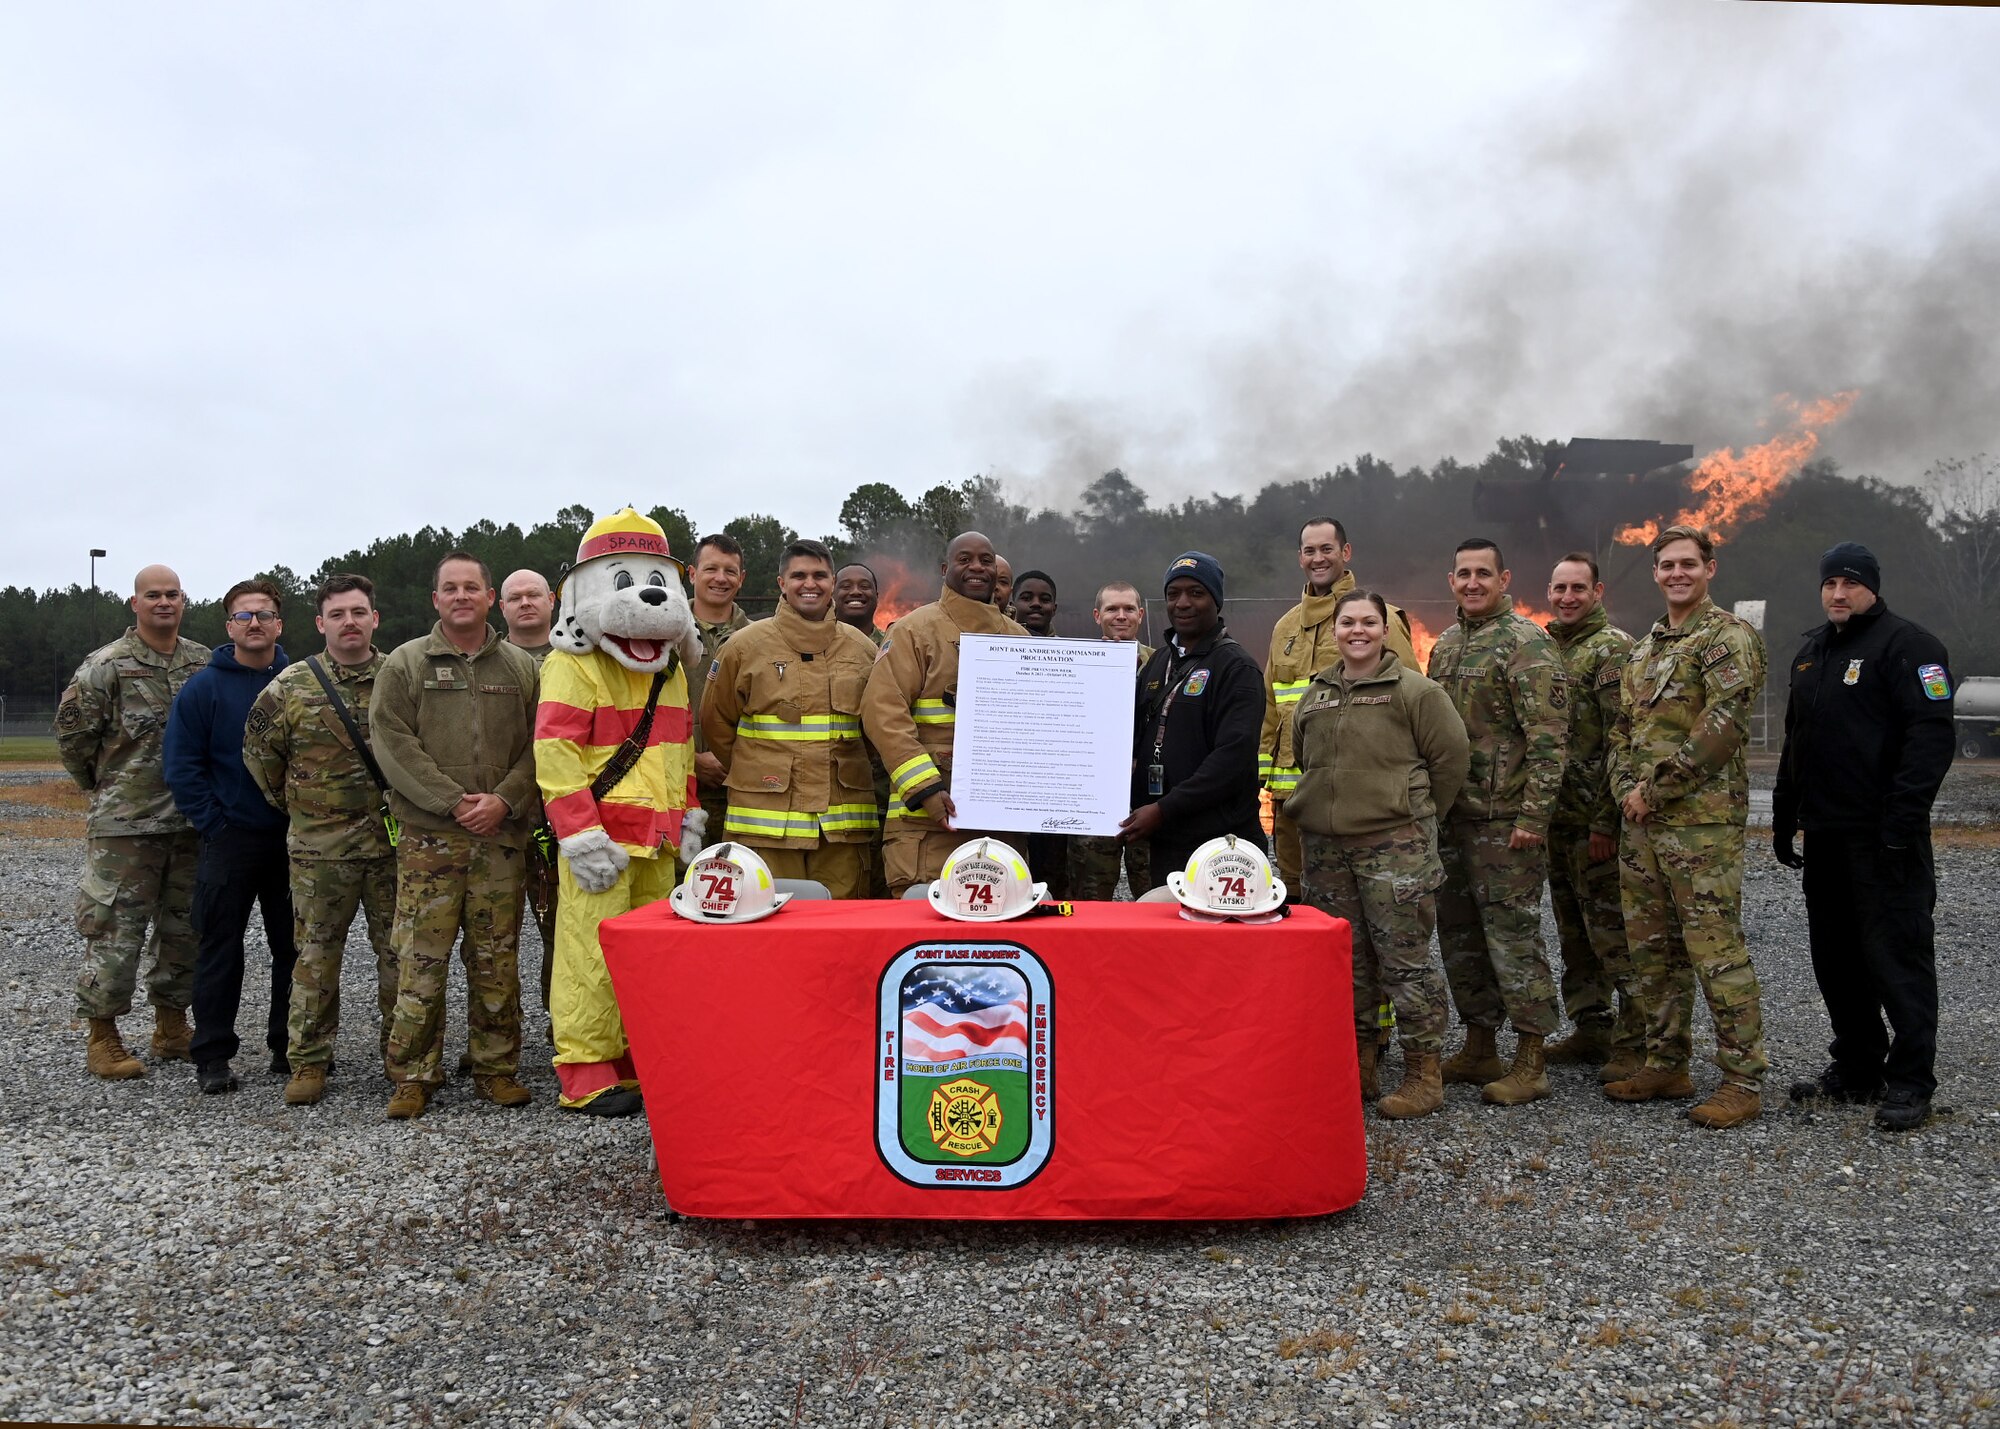 Joint Base Andrews leaders and 316th Mission Support Group personnel pose for a group photo following the signing of a Fire Prevention Week proclamation at Joint Base Andrews, Md., Oct. 4, 2022. From Oct. 9 - Oct. 15, JBA will host events such as a fire truck parade and a fire station open house and barbeque to raise fire safety awareness and educate families, students and communities across JBA. (U.S. Air Force photo by Airman 1st Class Austin Pate)